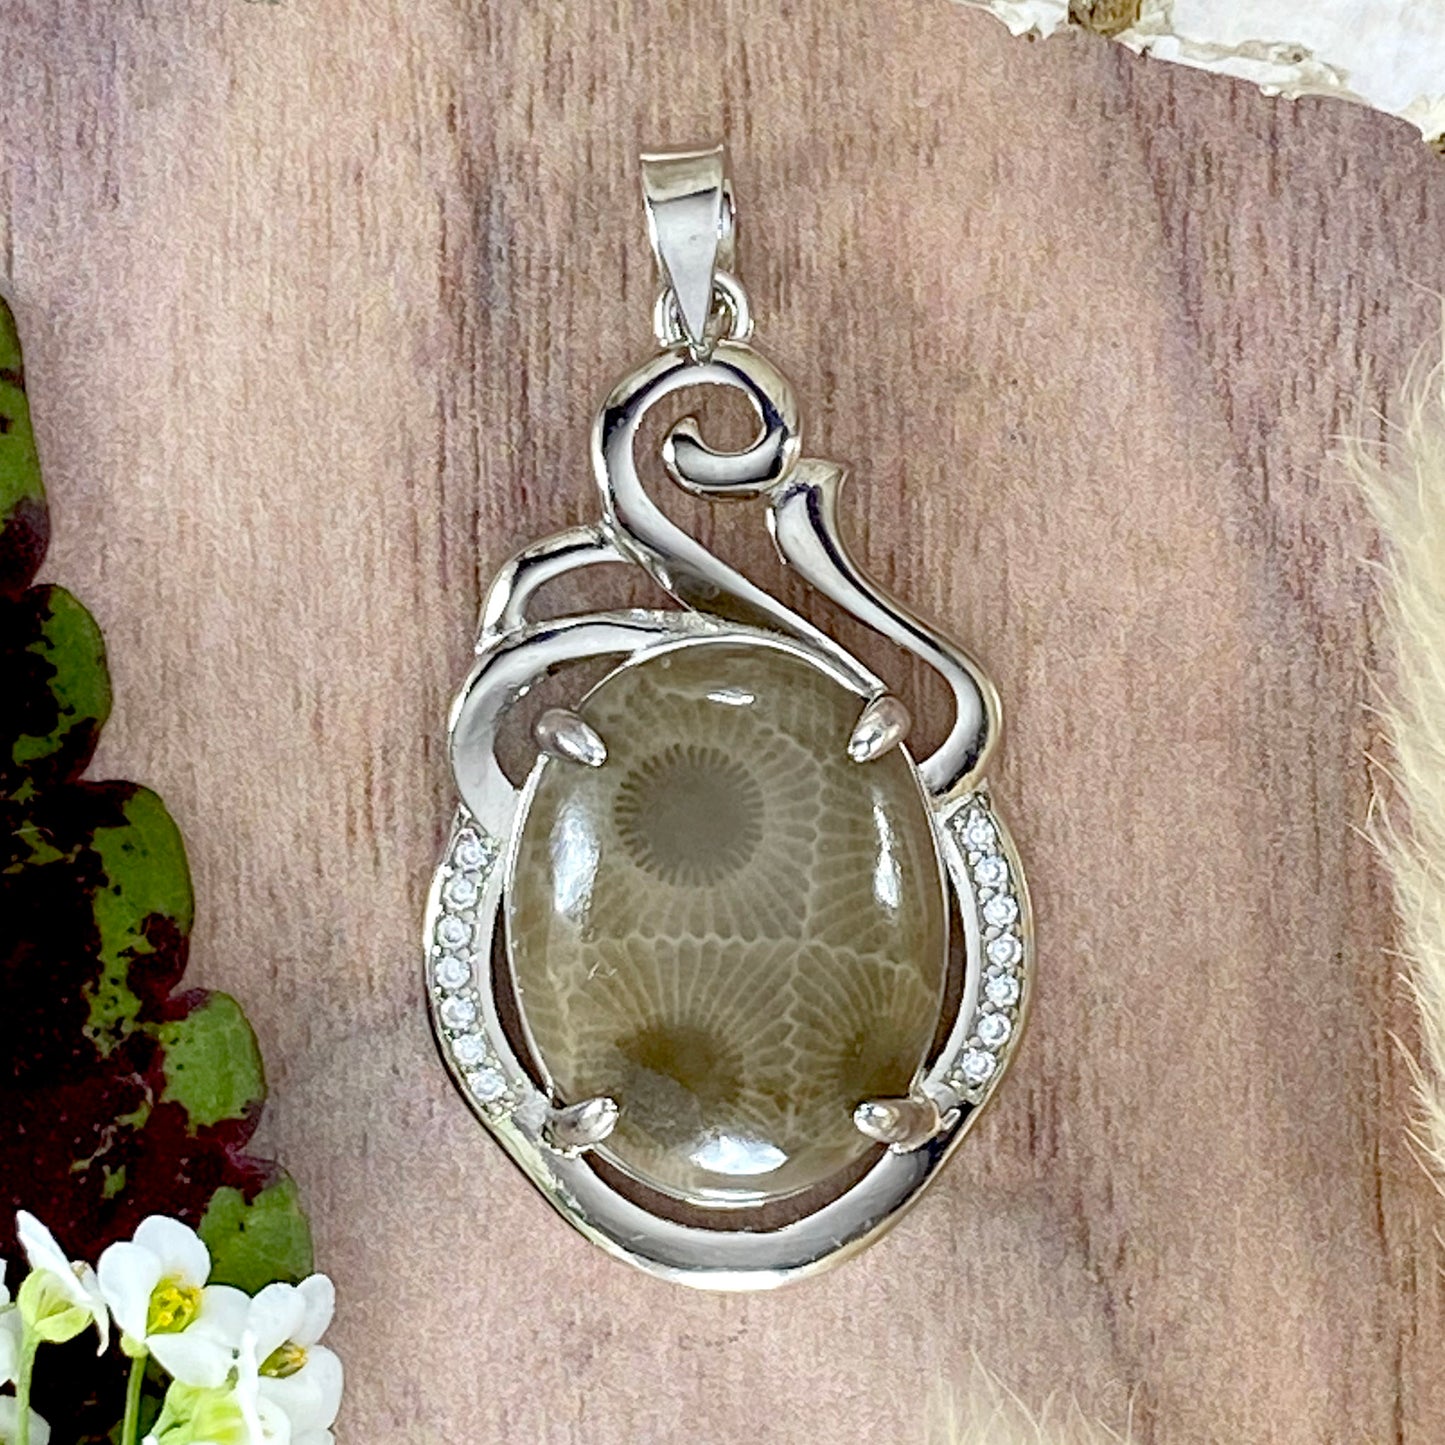 Petoskey Stone Pendant Necklace Front View V - Stone Treasures by the Lake